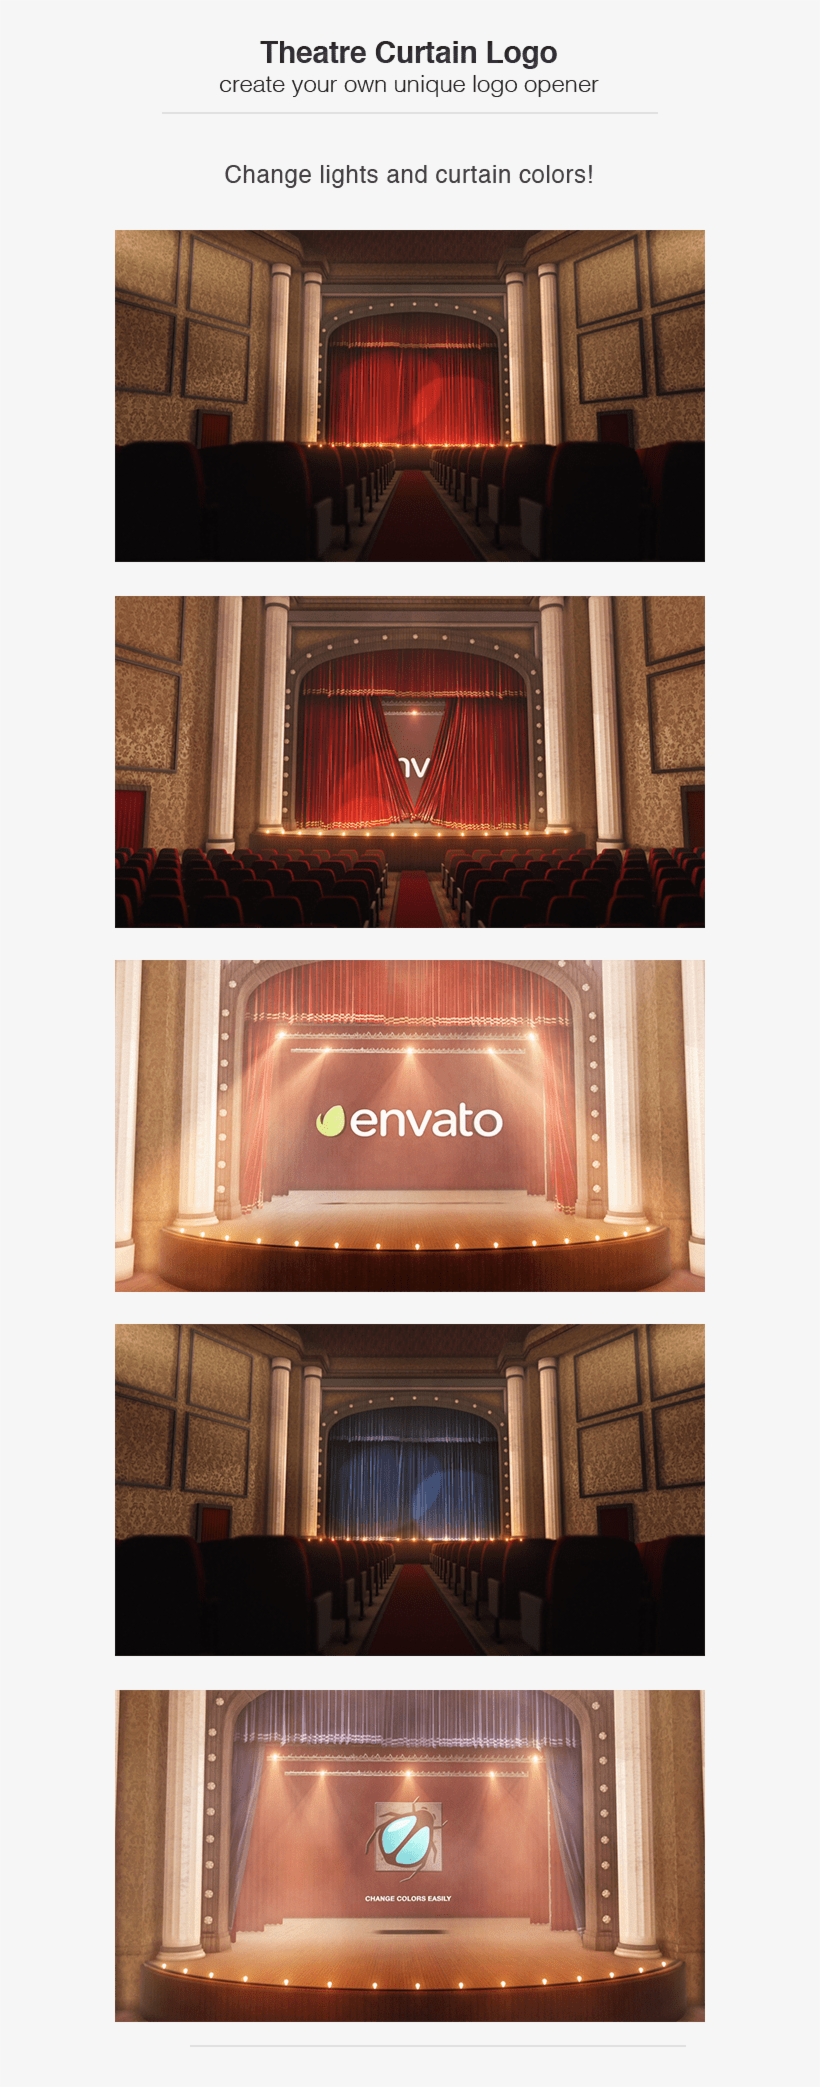 Theatre Curtain Logo Is A Cinematic Curtain Opener - Stage, transparent png #1622630